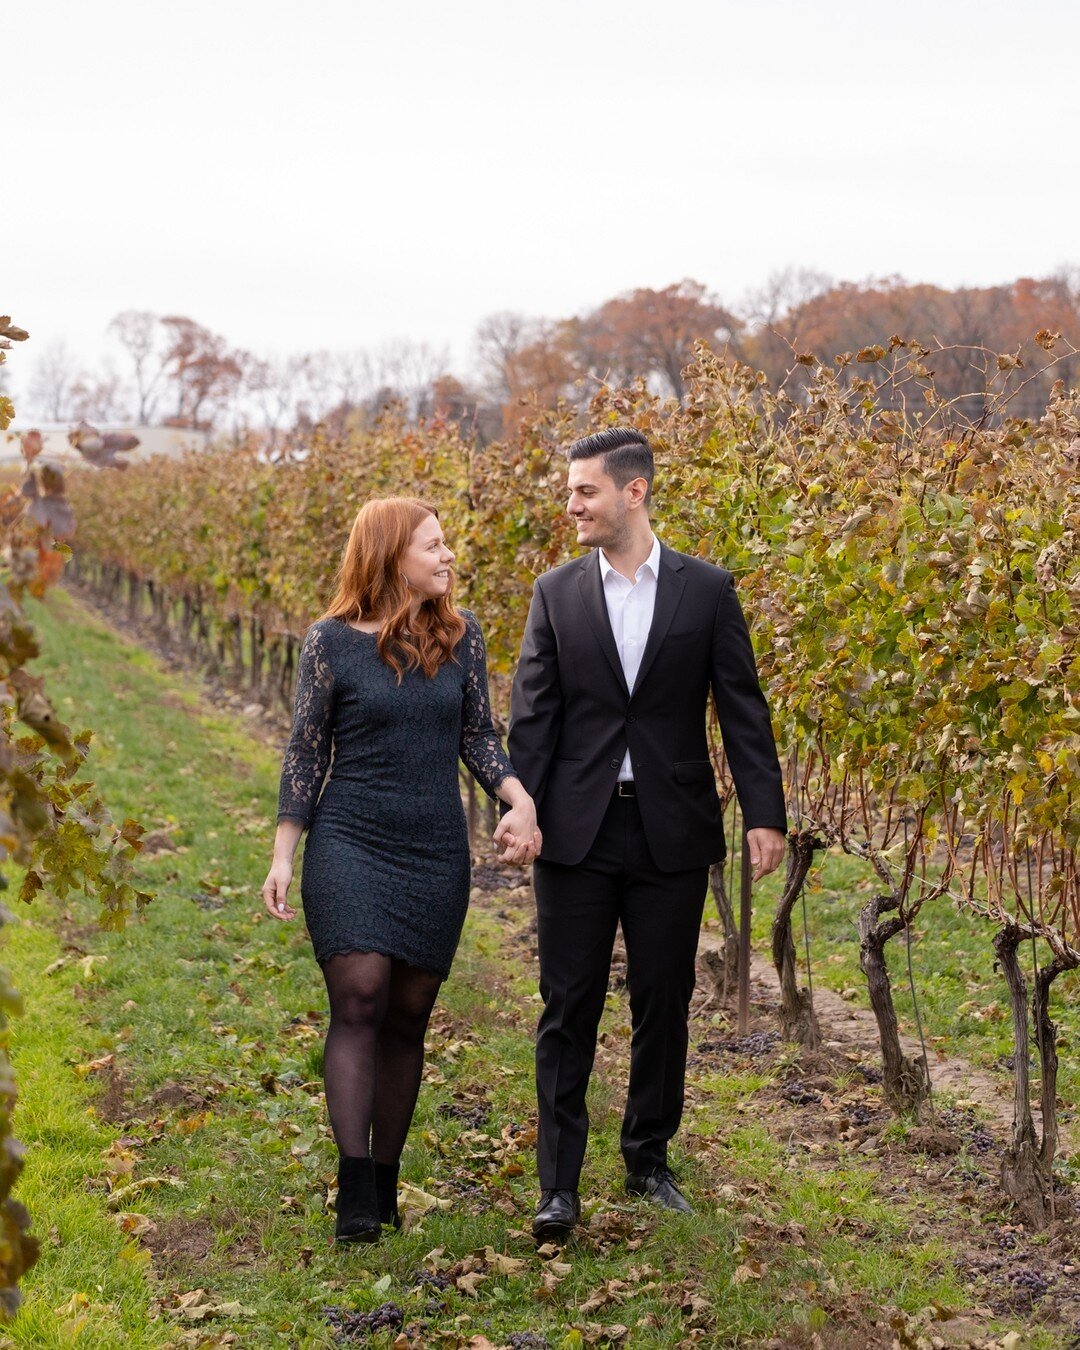 Soon we will be walking the vineyards and celebrating your engagements and wedding days 💕​​​​​​​​
​​​​​​​​
Tell us, what are you most excited for this spring and summer?